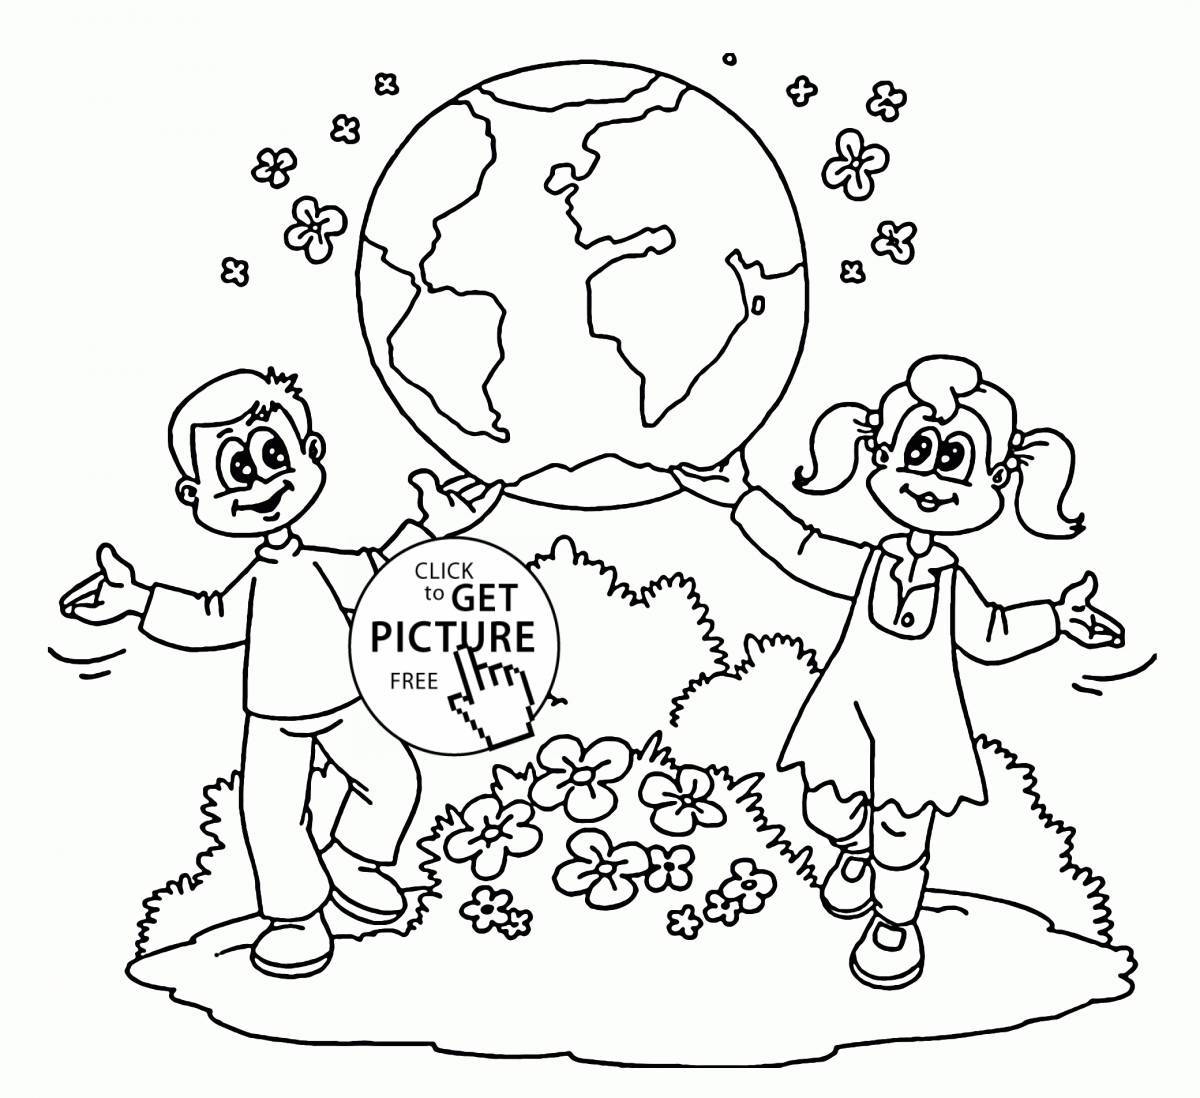 Bright wednesday coloring page